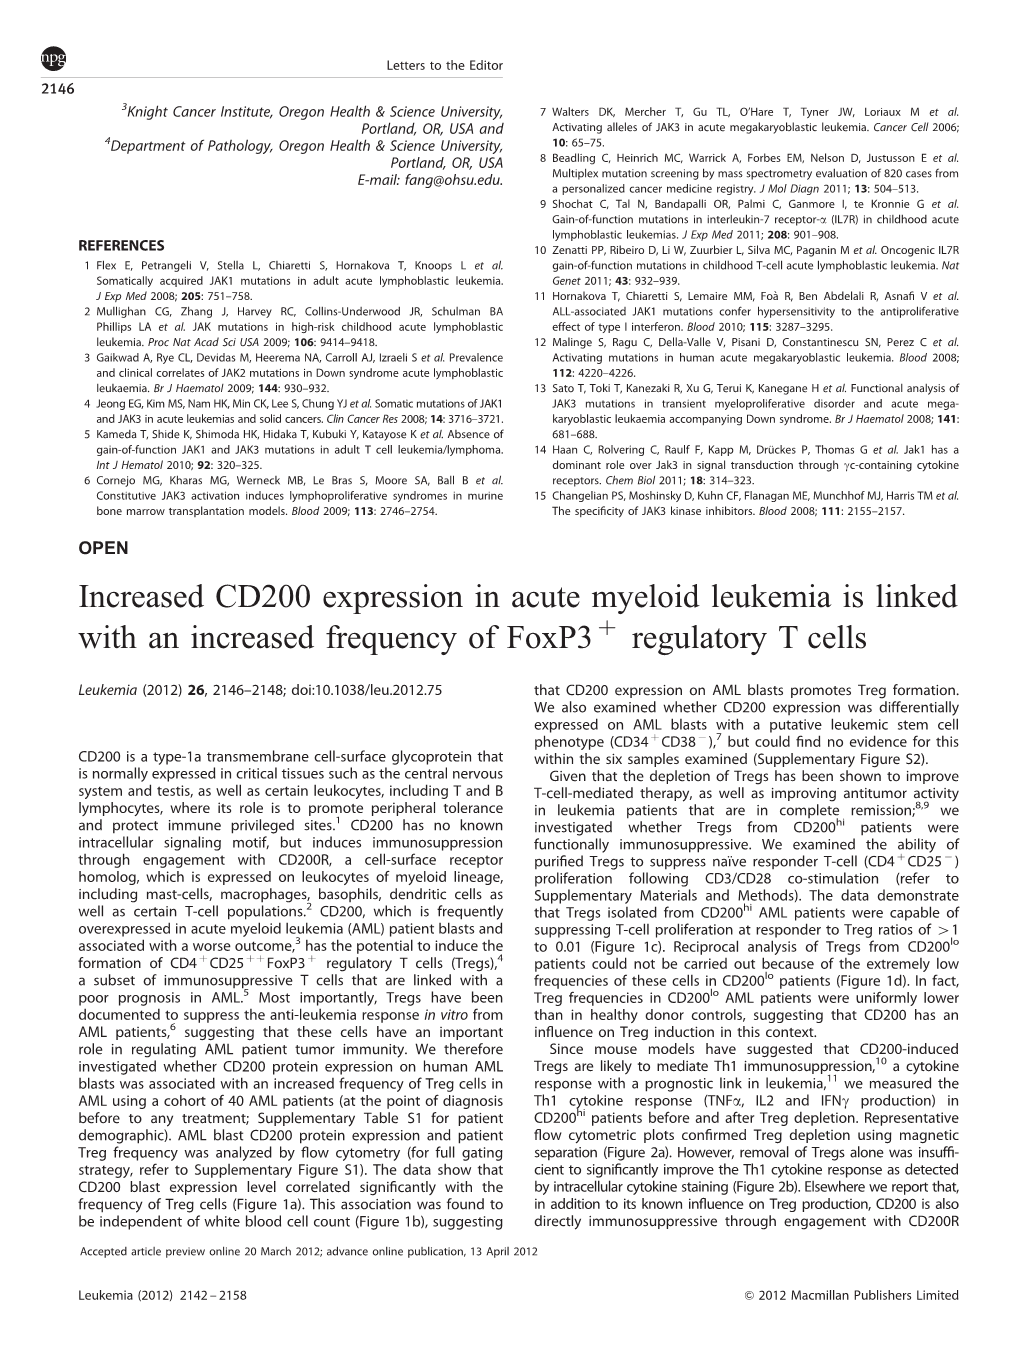 Increased CD200 Expression in Acute Myeloid Leukemia Is Linked with an Increased Frequency of Foxp3 Þ Regulatory T Cells